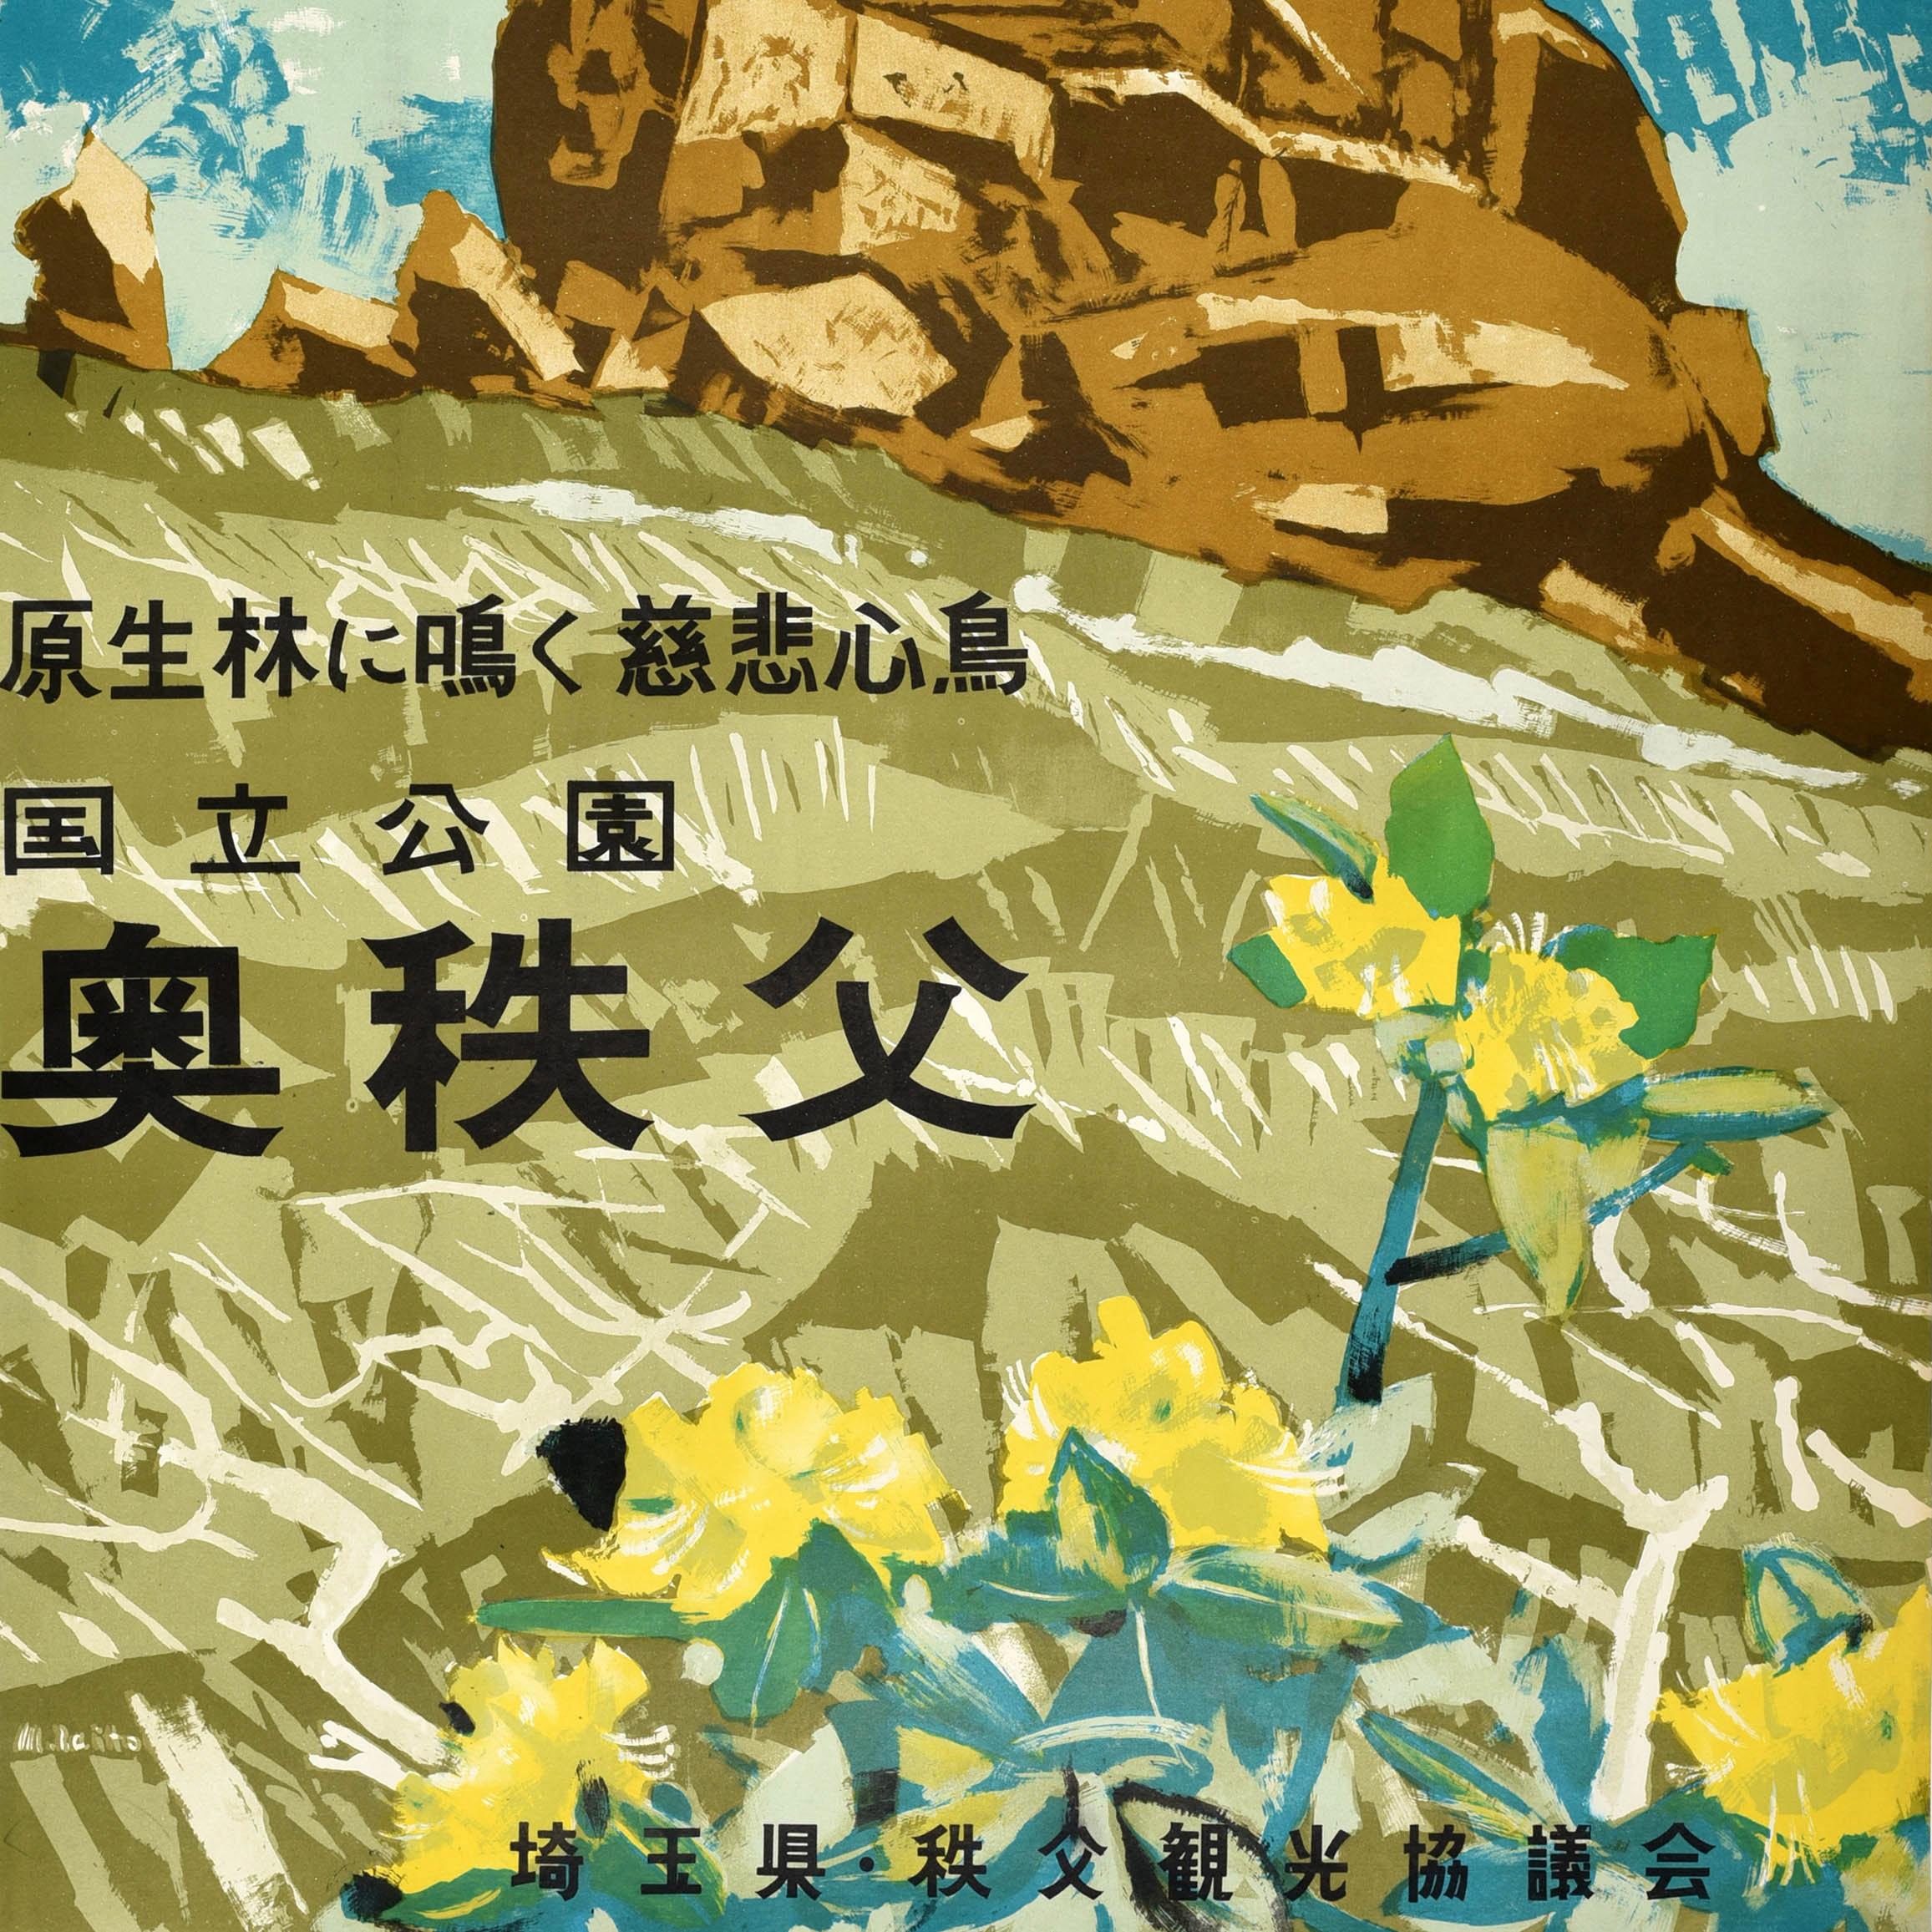 Original vintage travel poster for the Chichibu Tama Kai National Park in Japan issued by the Saitama Prefecture Chichibu Tourism Council featuring yellow flowers and a field of green grass leading up to a dramatic rock formation in front of the